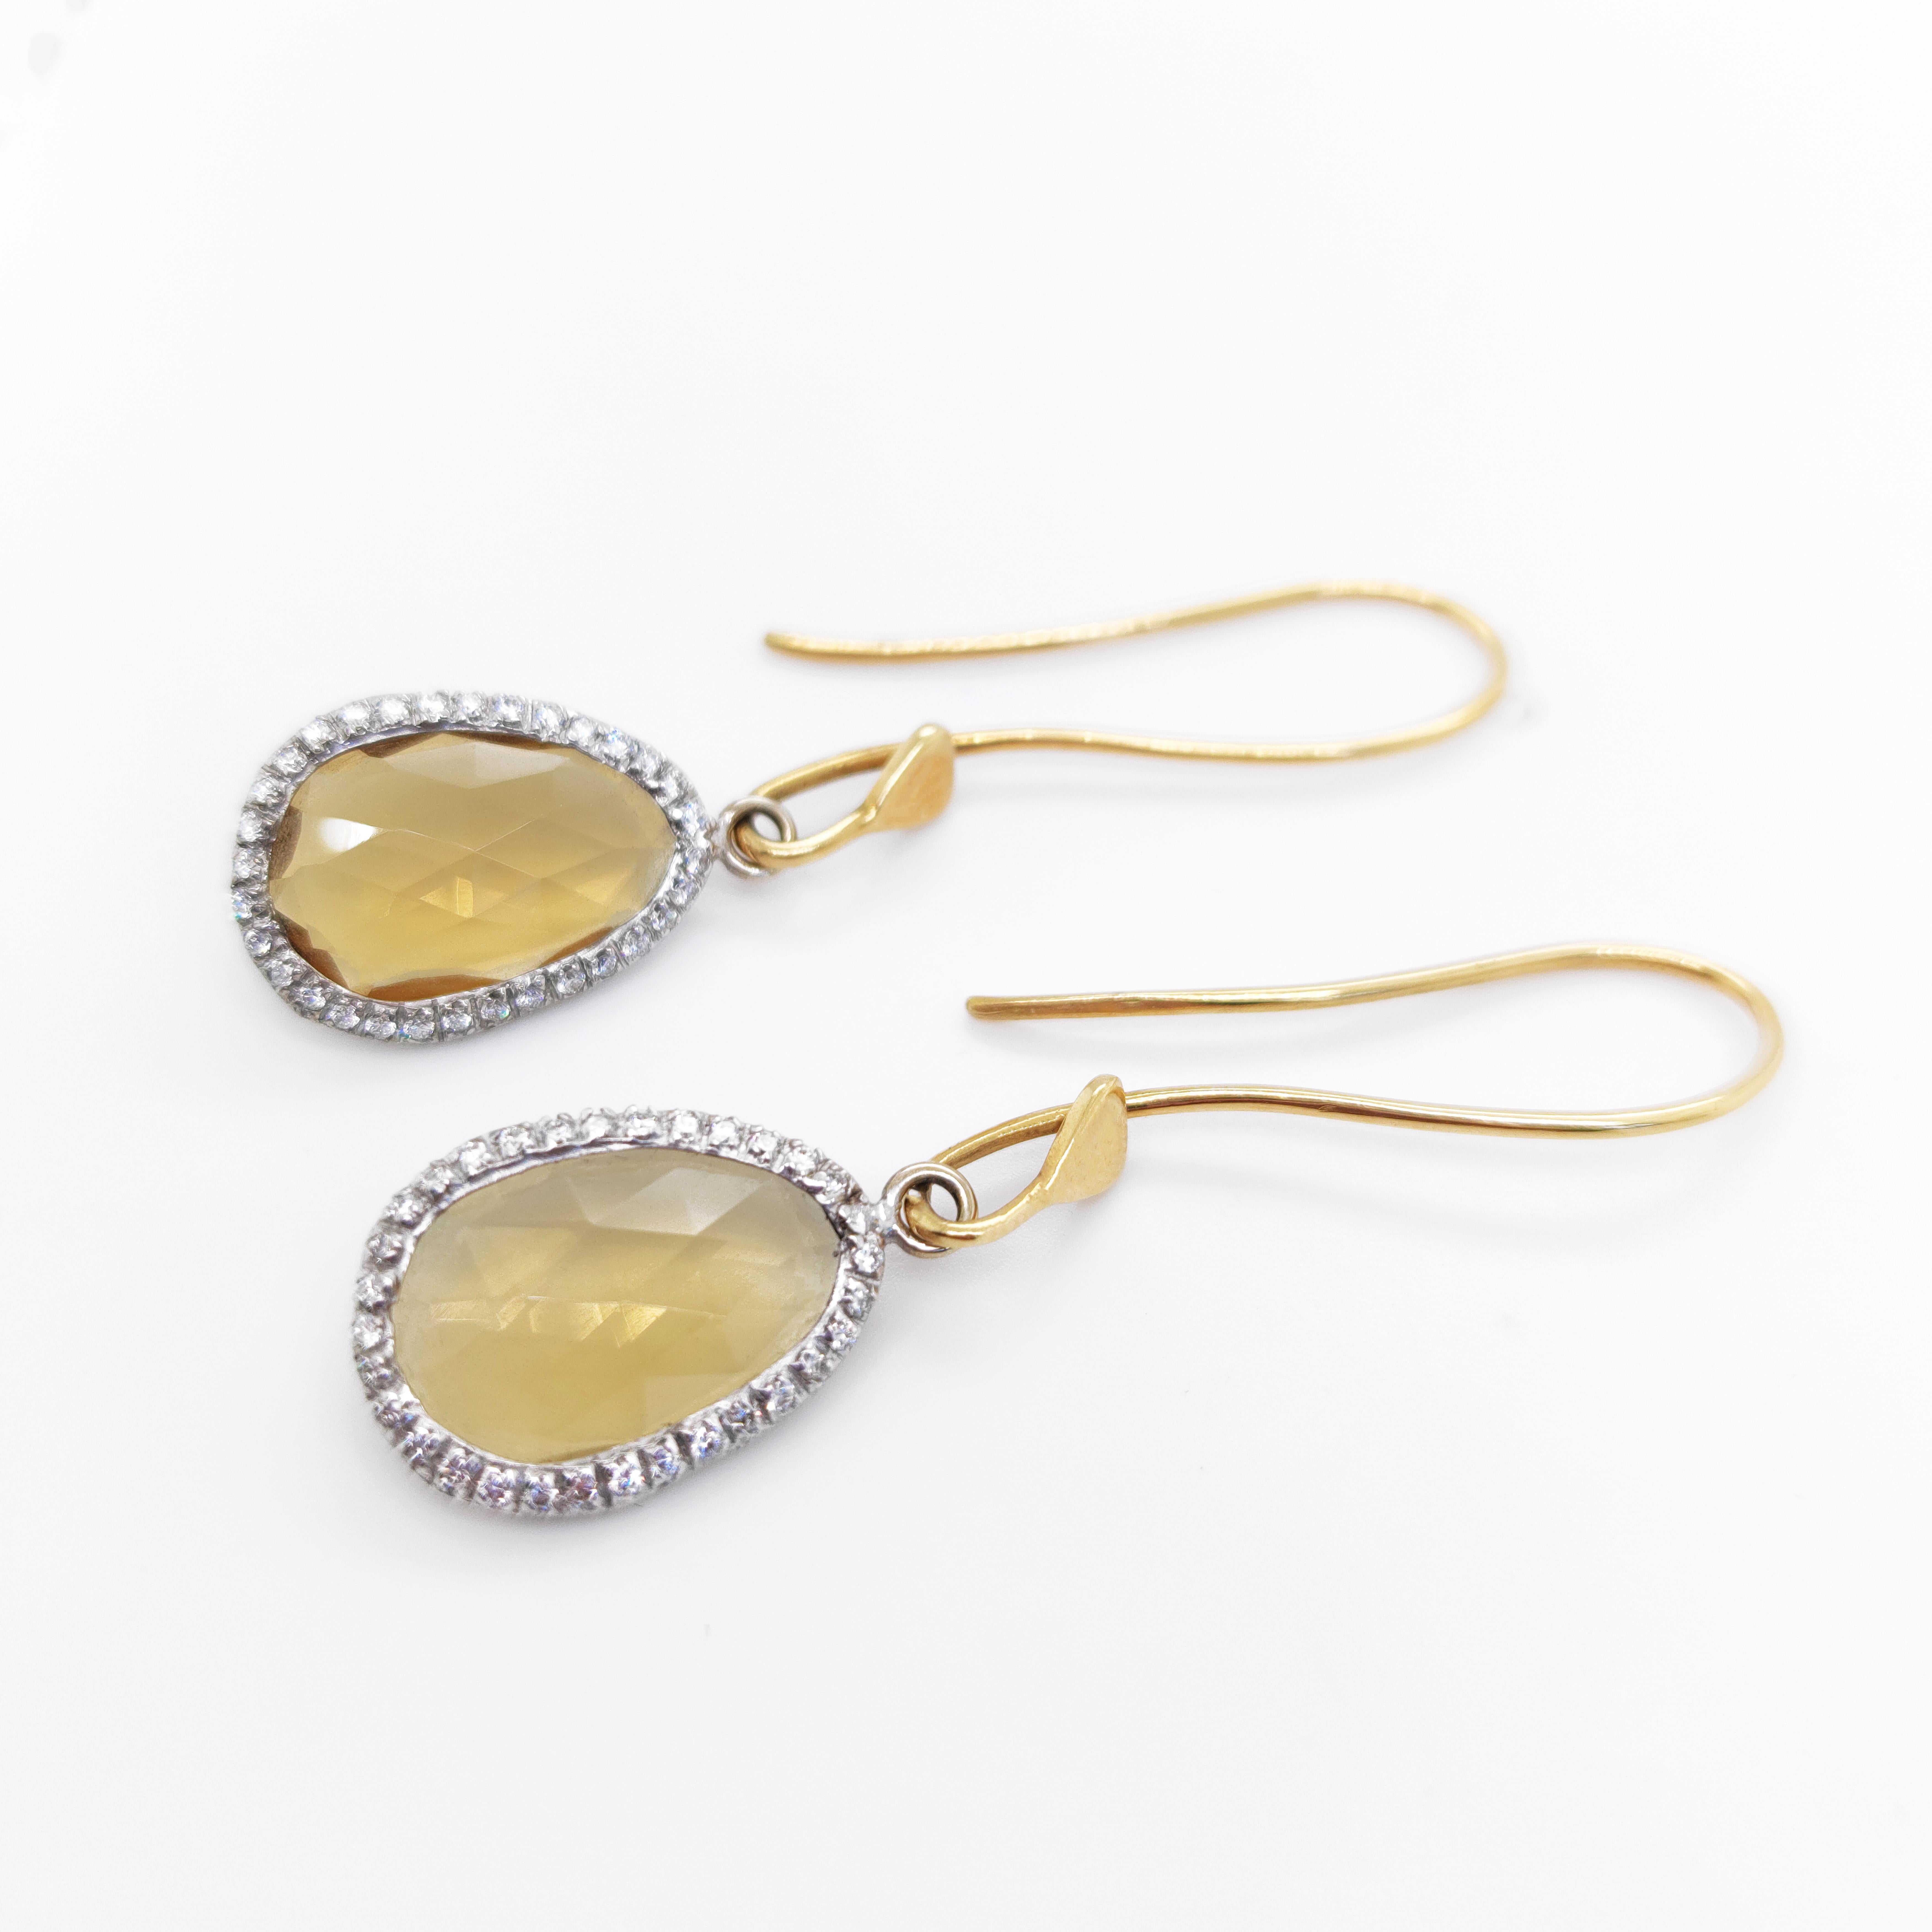 The Dharma collection takes inspiration from far away cultures reinterpreted in an occidental version. 
There is a game of fusion of natural stones, like citrine quartz in this earrings, featured in flat to mixed-cut stones. The co-presence of a